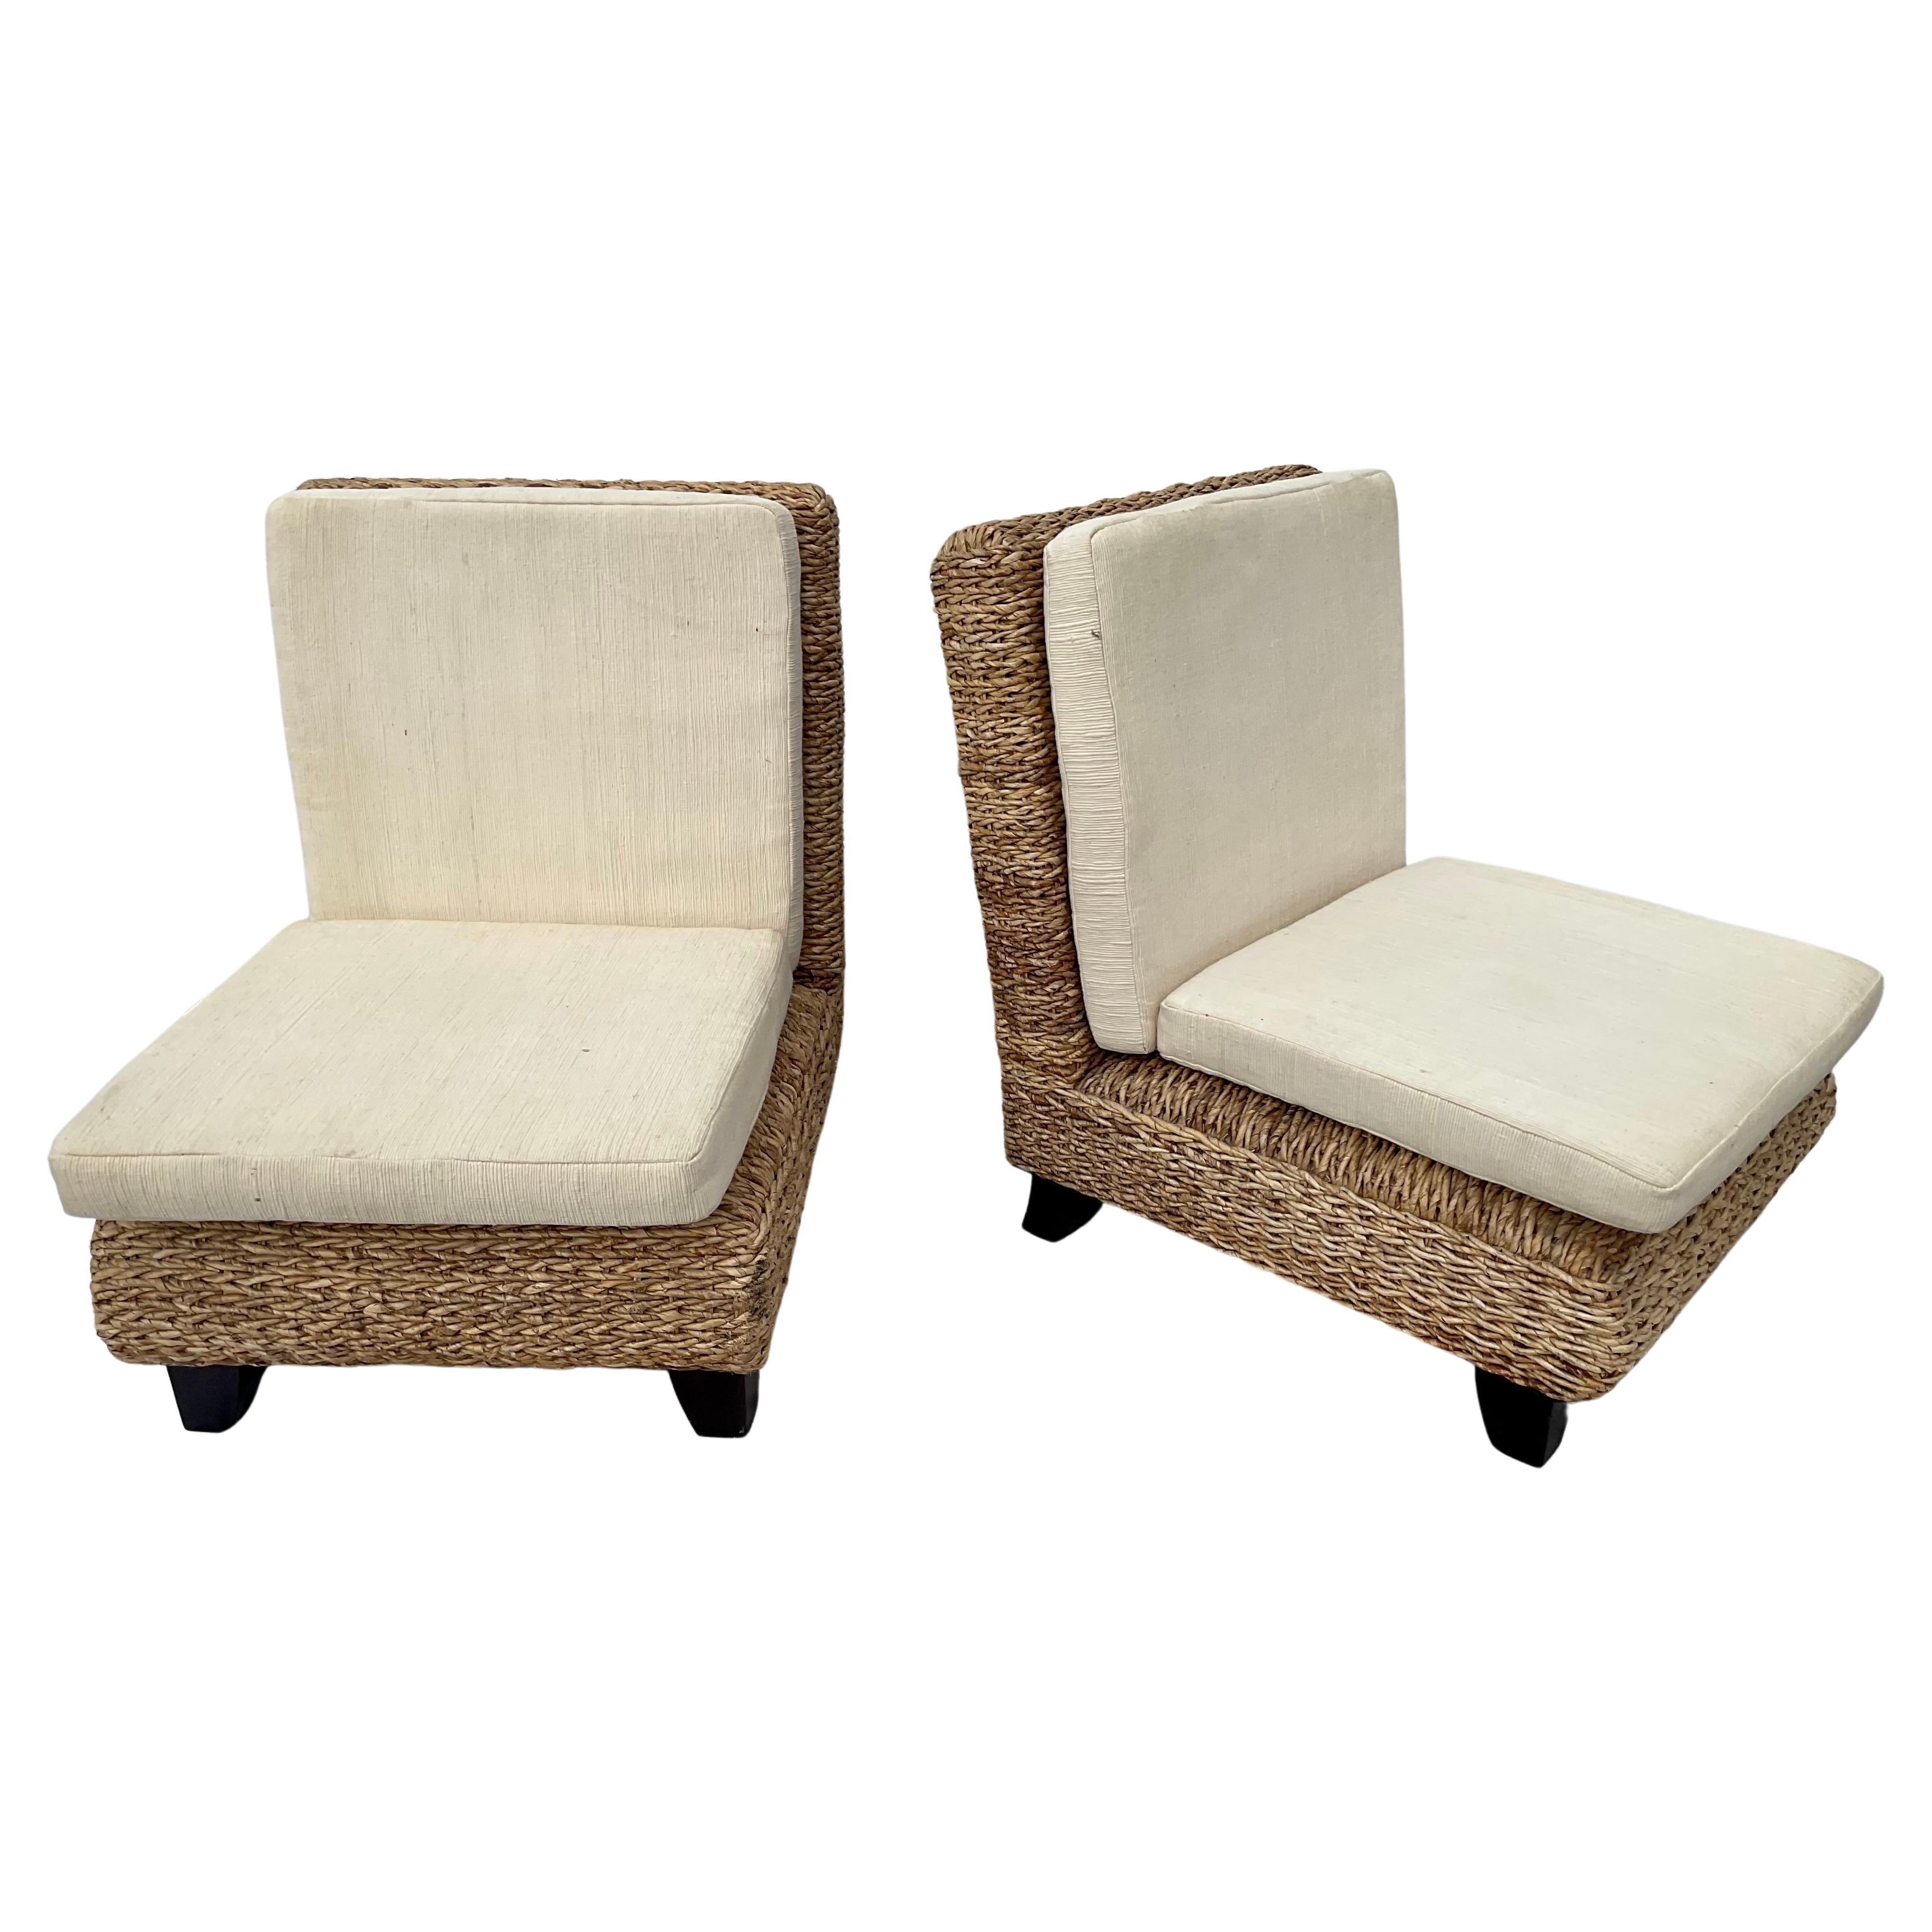 Pair Of Modern Woven Wicker Slipper Chairs For Sale